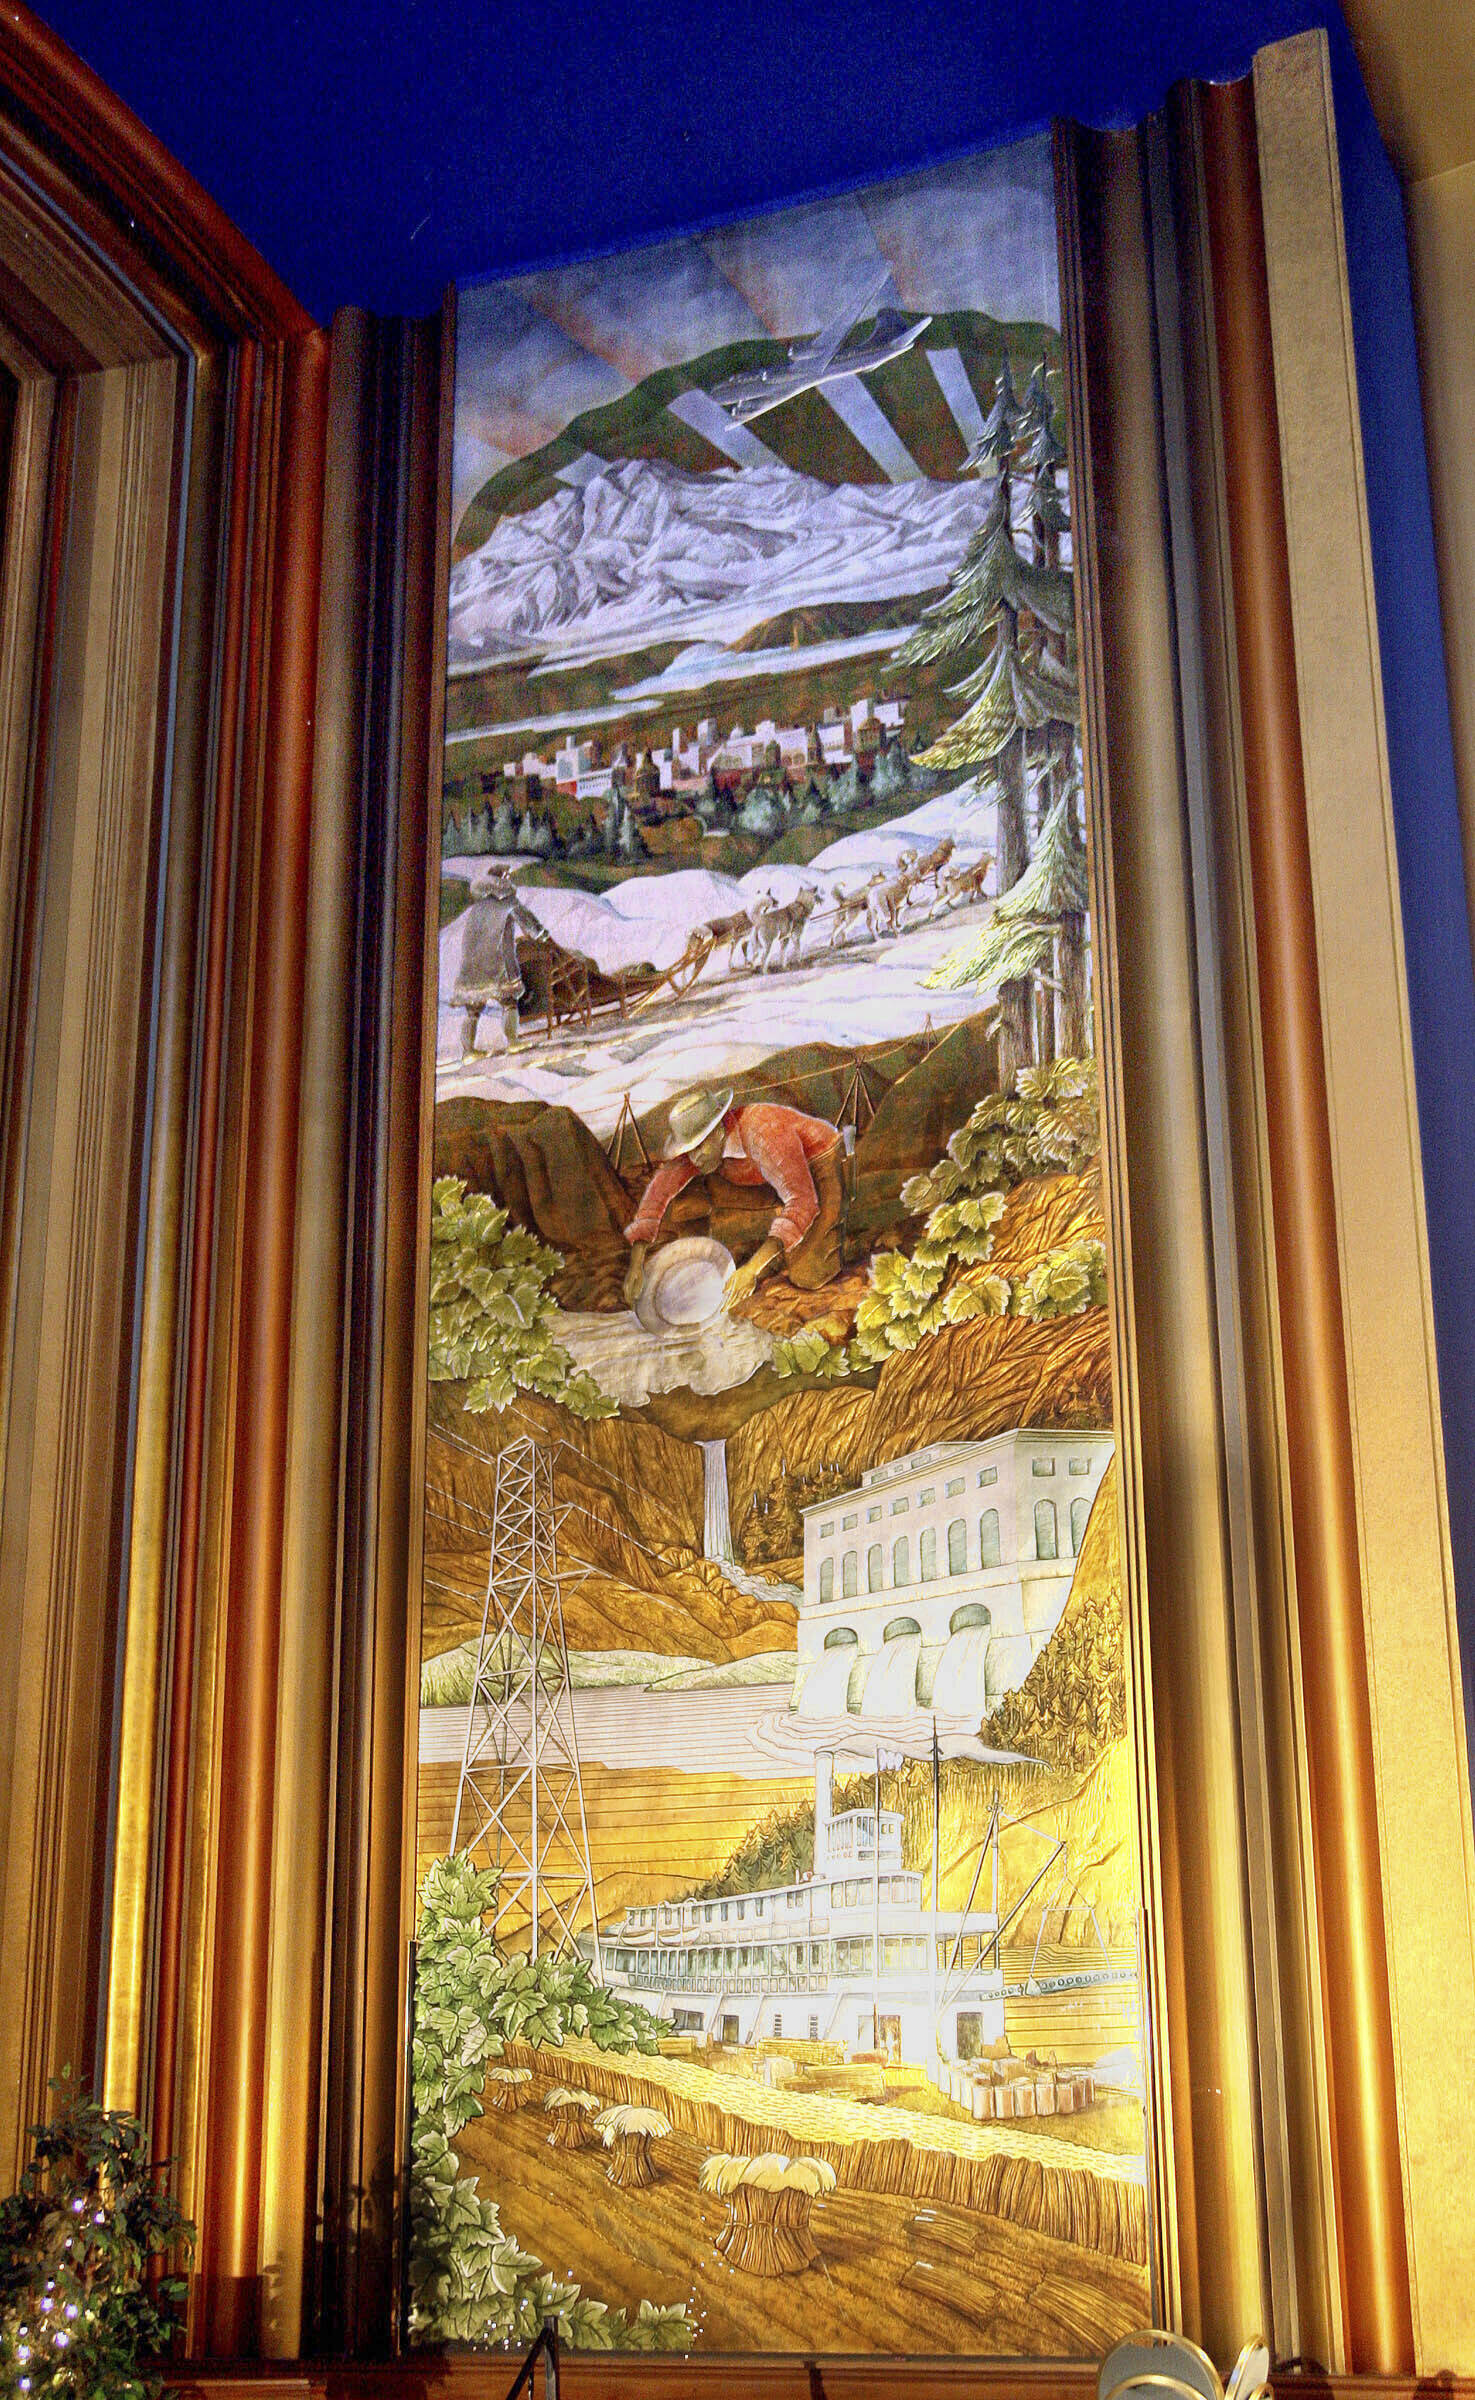 One of the gold- and silver-leaf murals of Alaska wildlife, industries and Mount McKinley hangs in the main room of the 4th Avenue Theatre in Anchorage, Alaska, on March 29, 2006. Demolition will begin in August 2022 on a once-opulent downtown Anchorage movie theater designed by the architect of Hollywood’s famed Pantages Theater. The 4th Avenue Theatre with nearly 1,000 seats opened in 1947, and it withstood the second most powerful earthquake ever recorded. (AP Photo/Al Grillo, File)